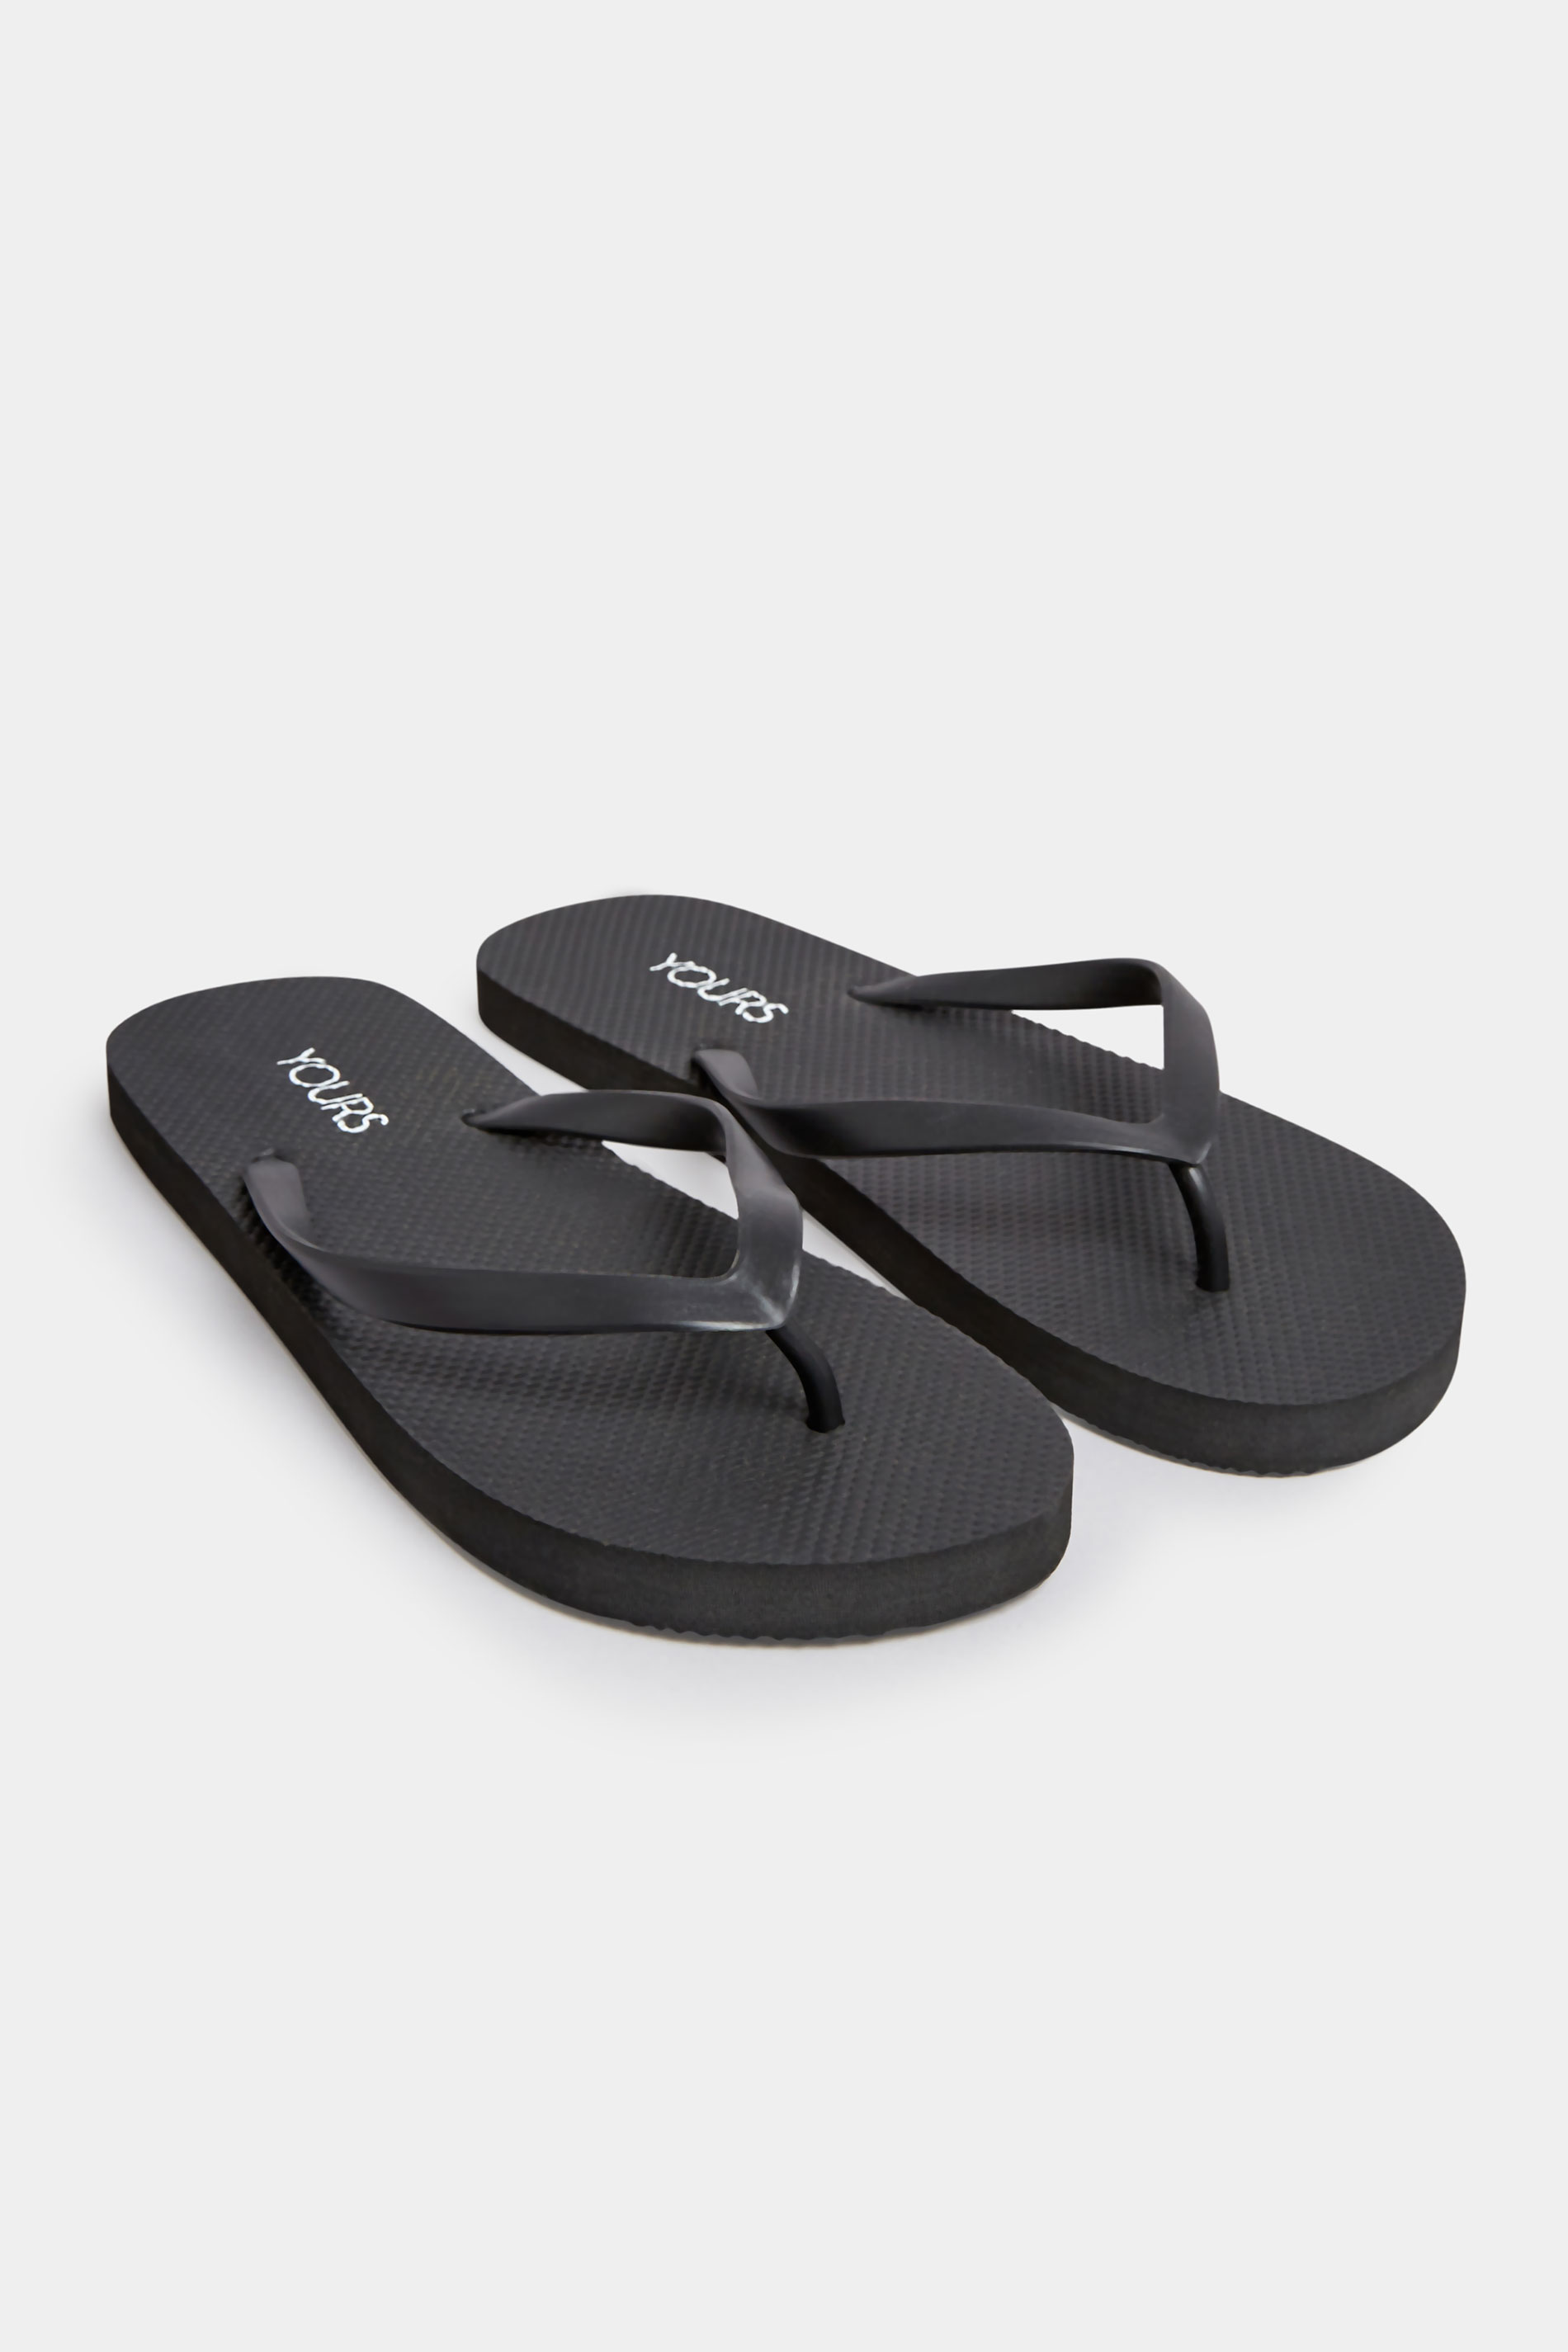 Black Toe Thong Flip Flops In Extra Wide EEE Fit | Yours Clothing